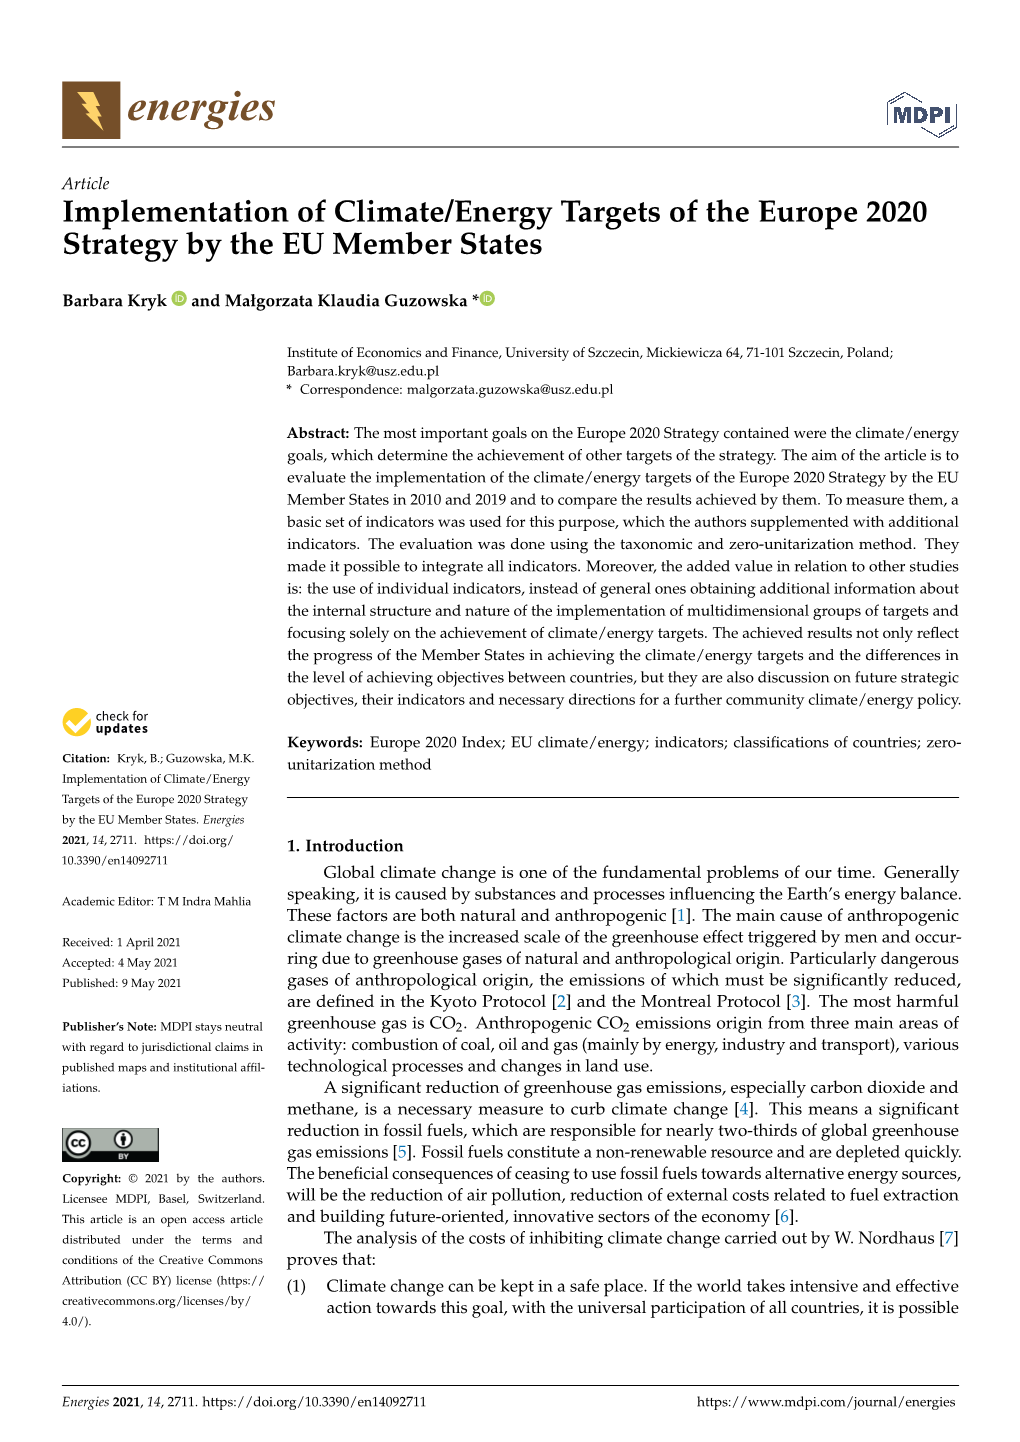 Implementation of Climate/Energy Targets of the Europe 2020 Strategy by the EU Member States